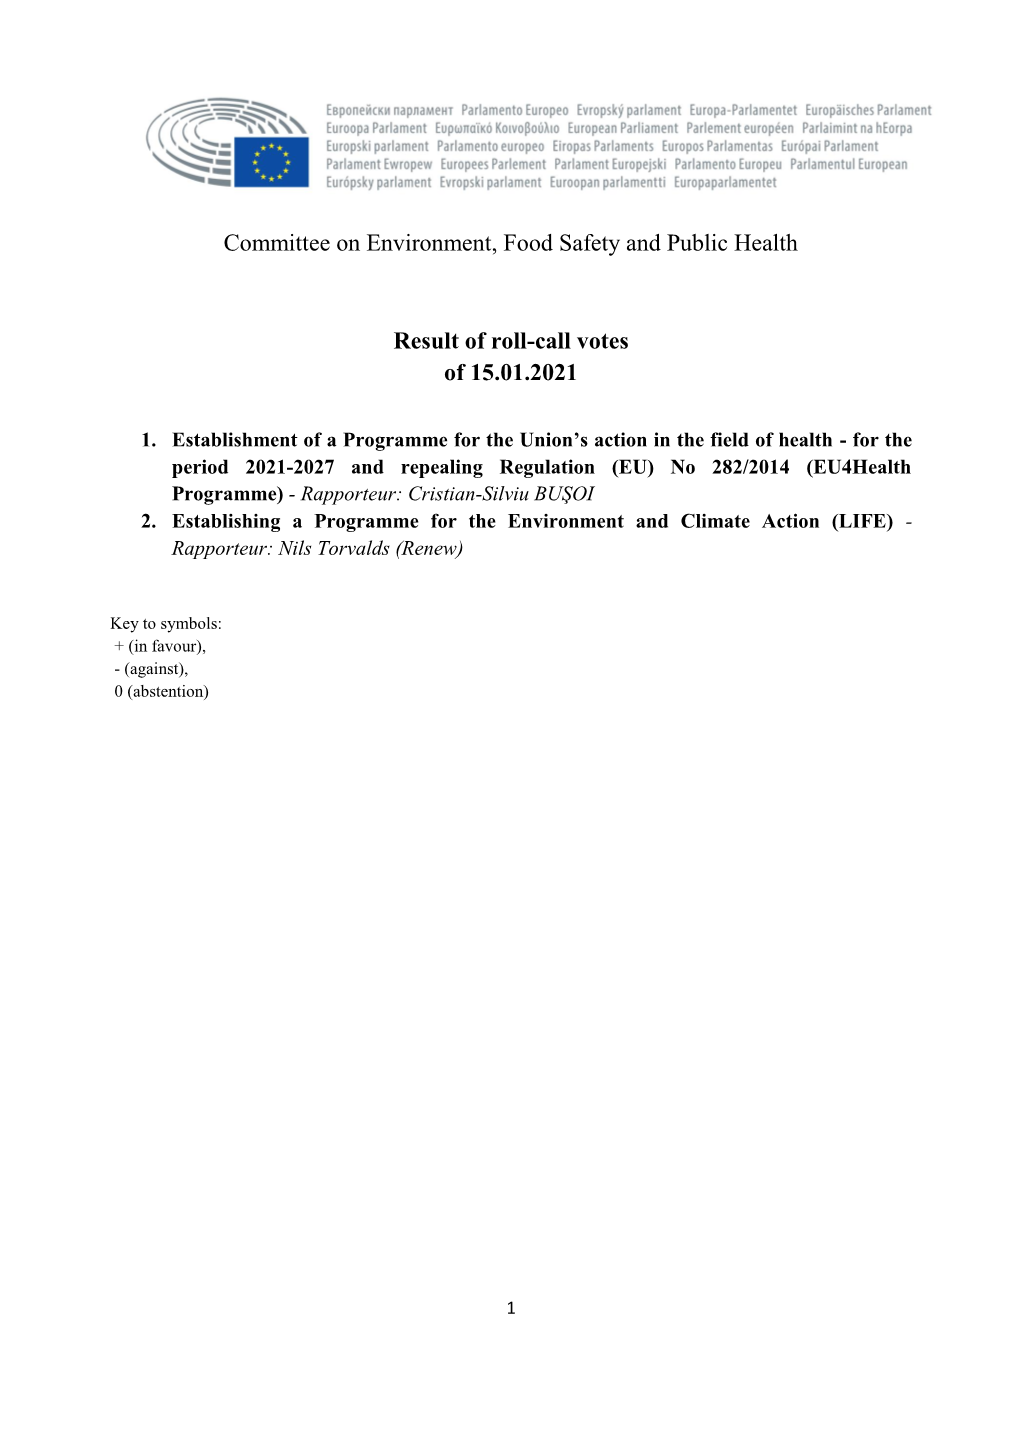 Committee on Environment, Food Safety and Public Health Result Of